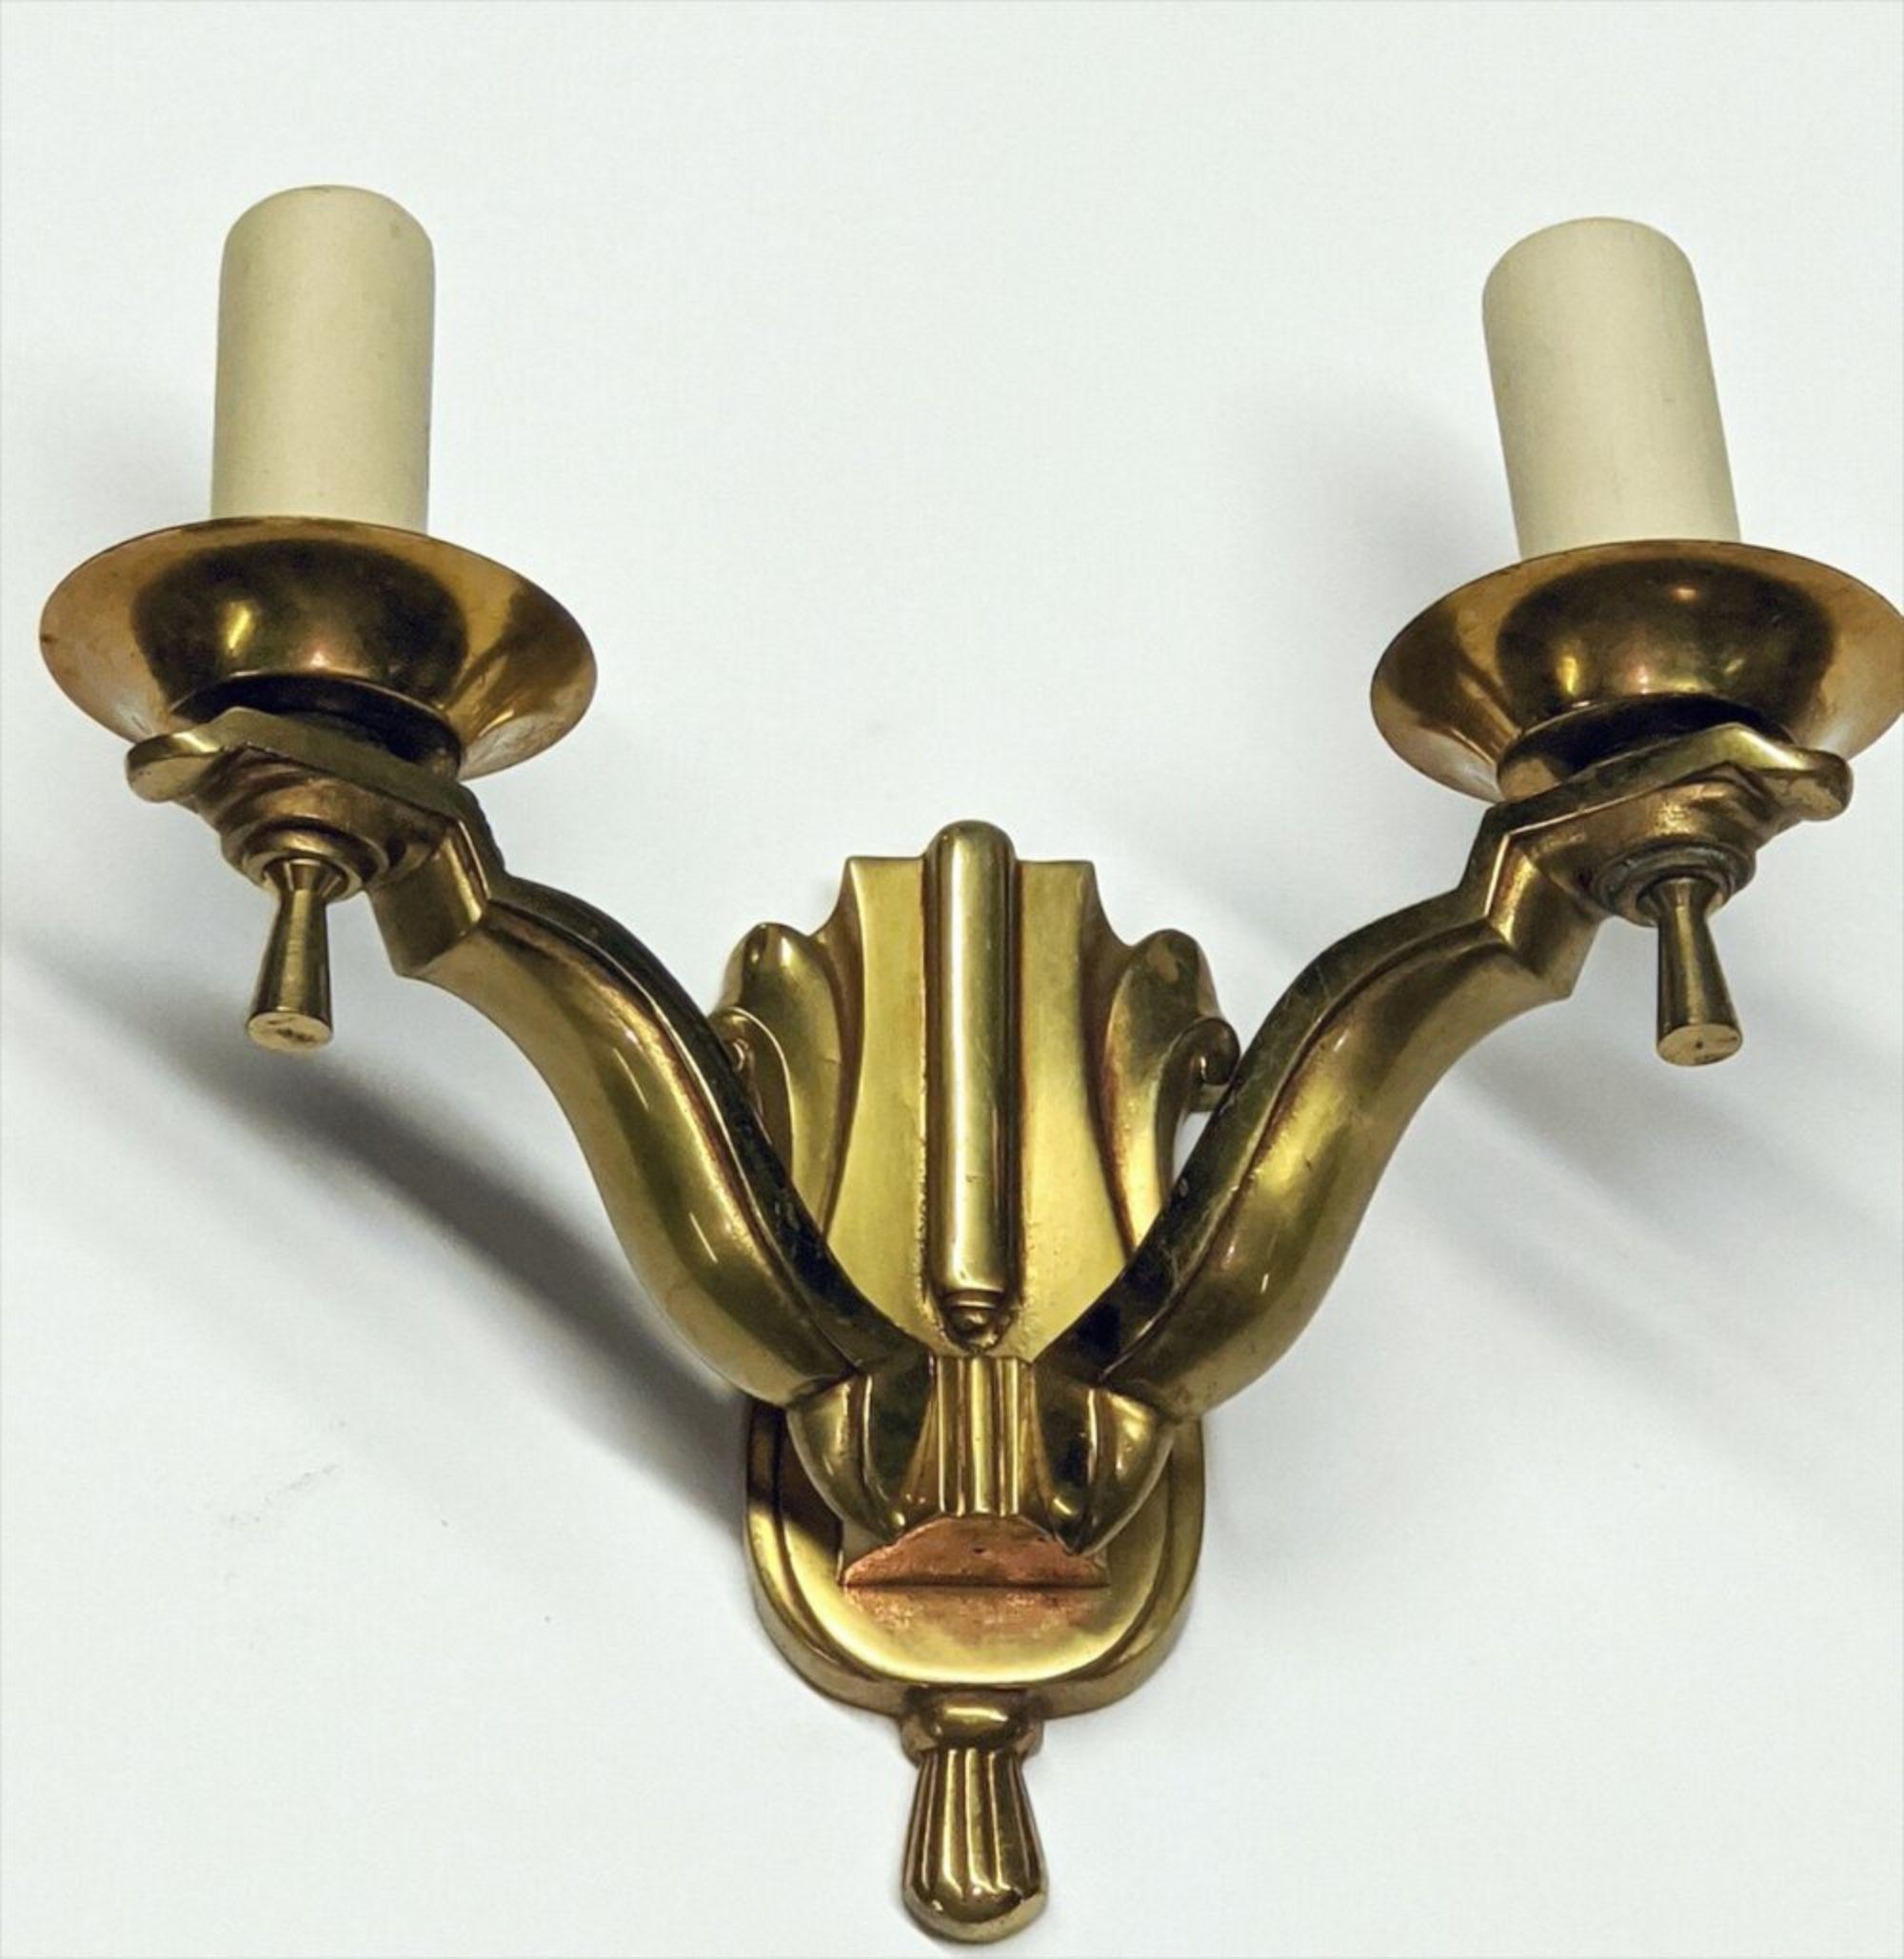 French Art Deco pair of bronze two-branch sconces in neoclassical style. Measures: 9” wide x 4” deep x 8” high. Designer: Unknown.